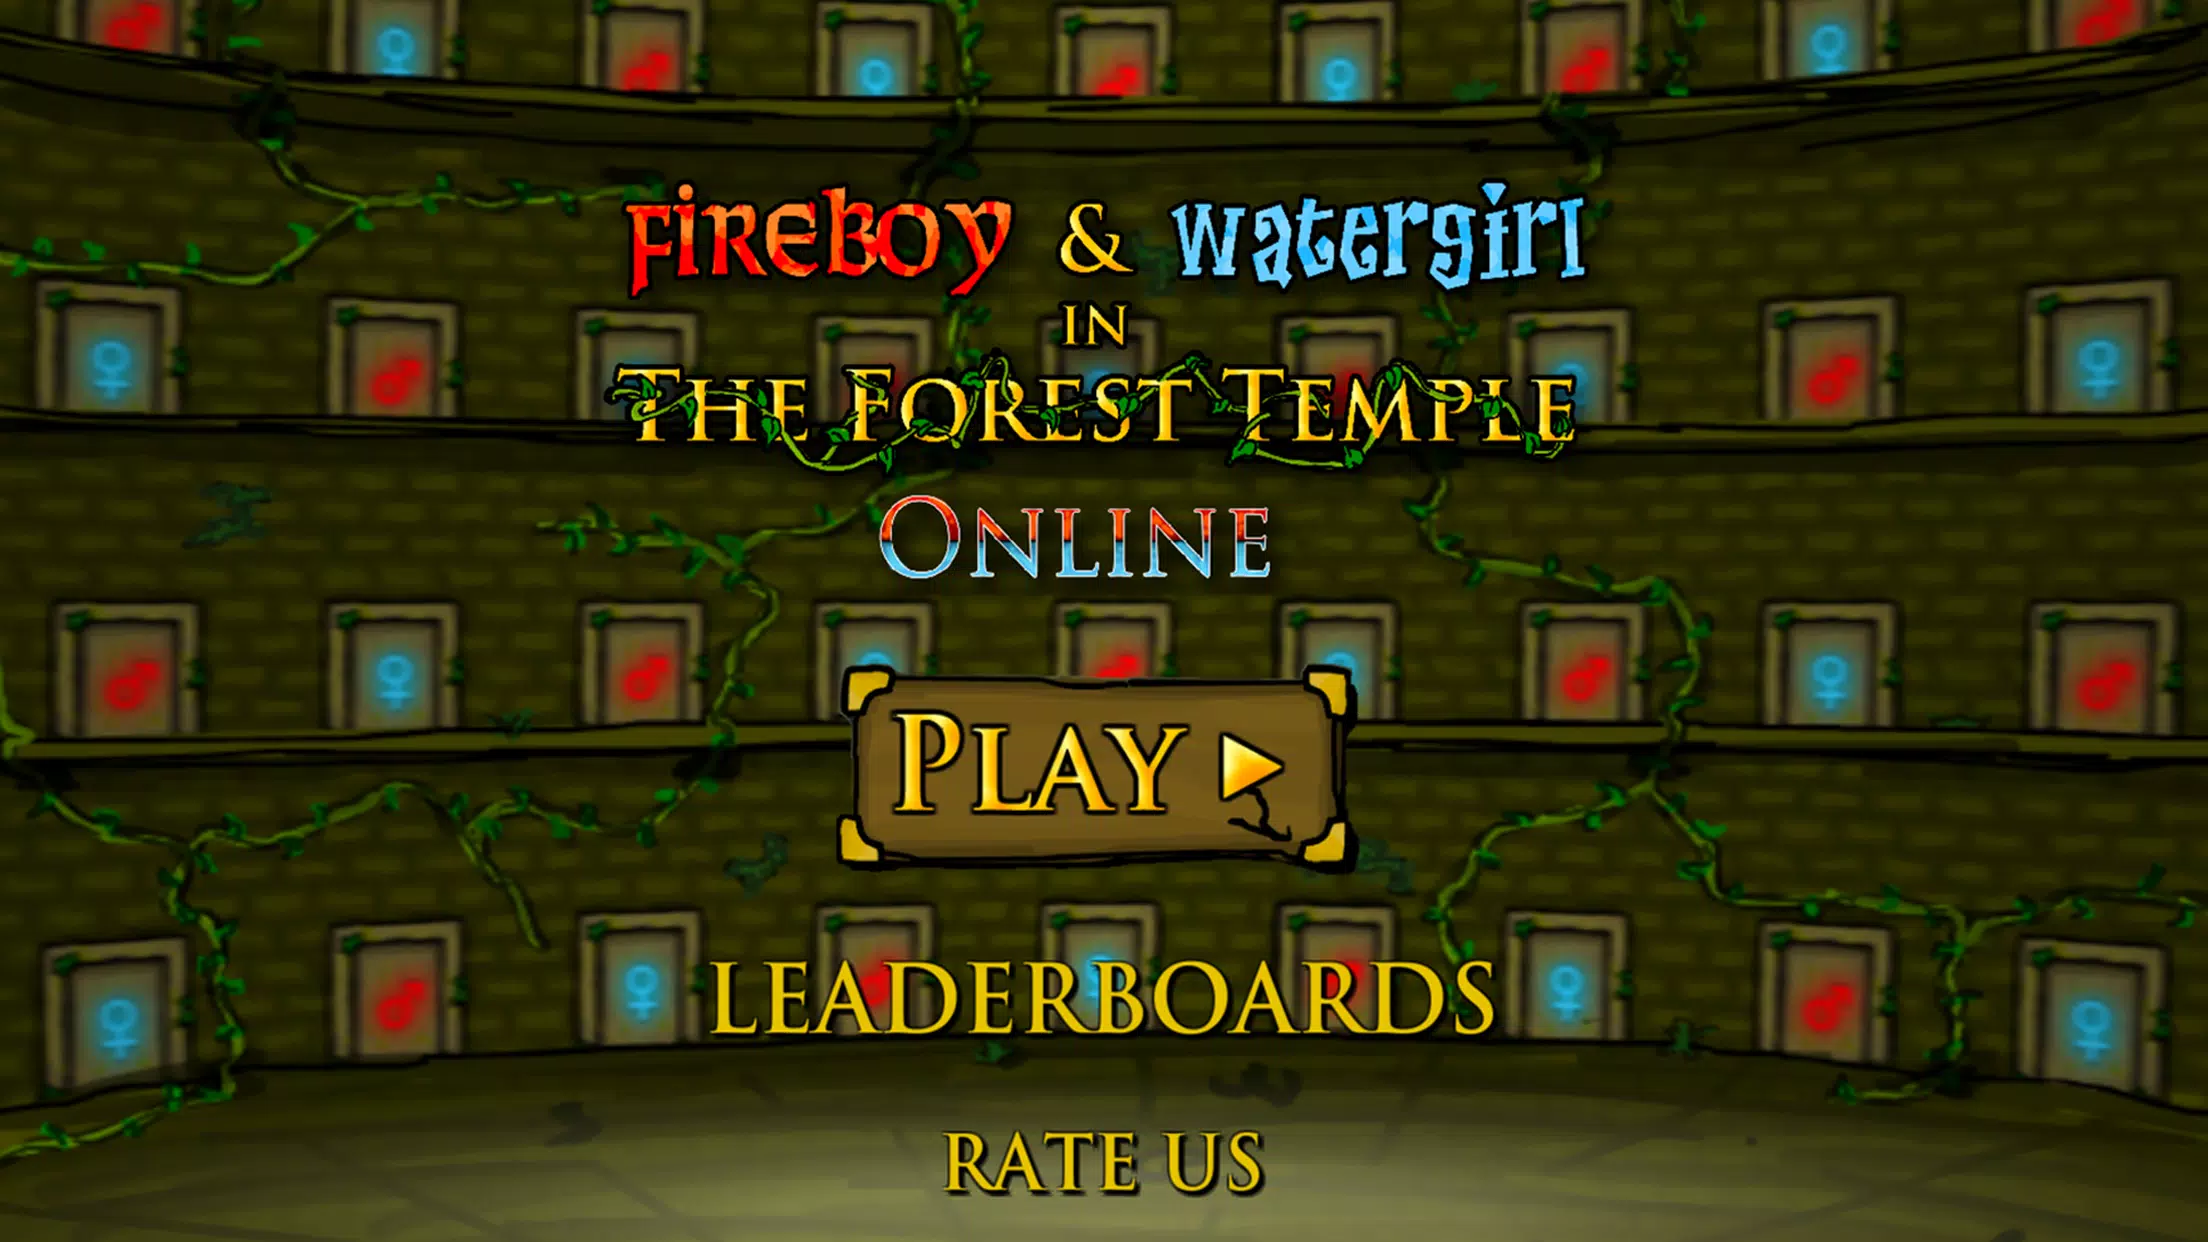 Fireboy and Watergirl: Online - Download & Play For Free